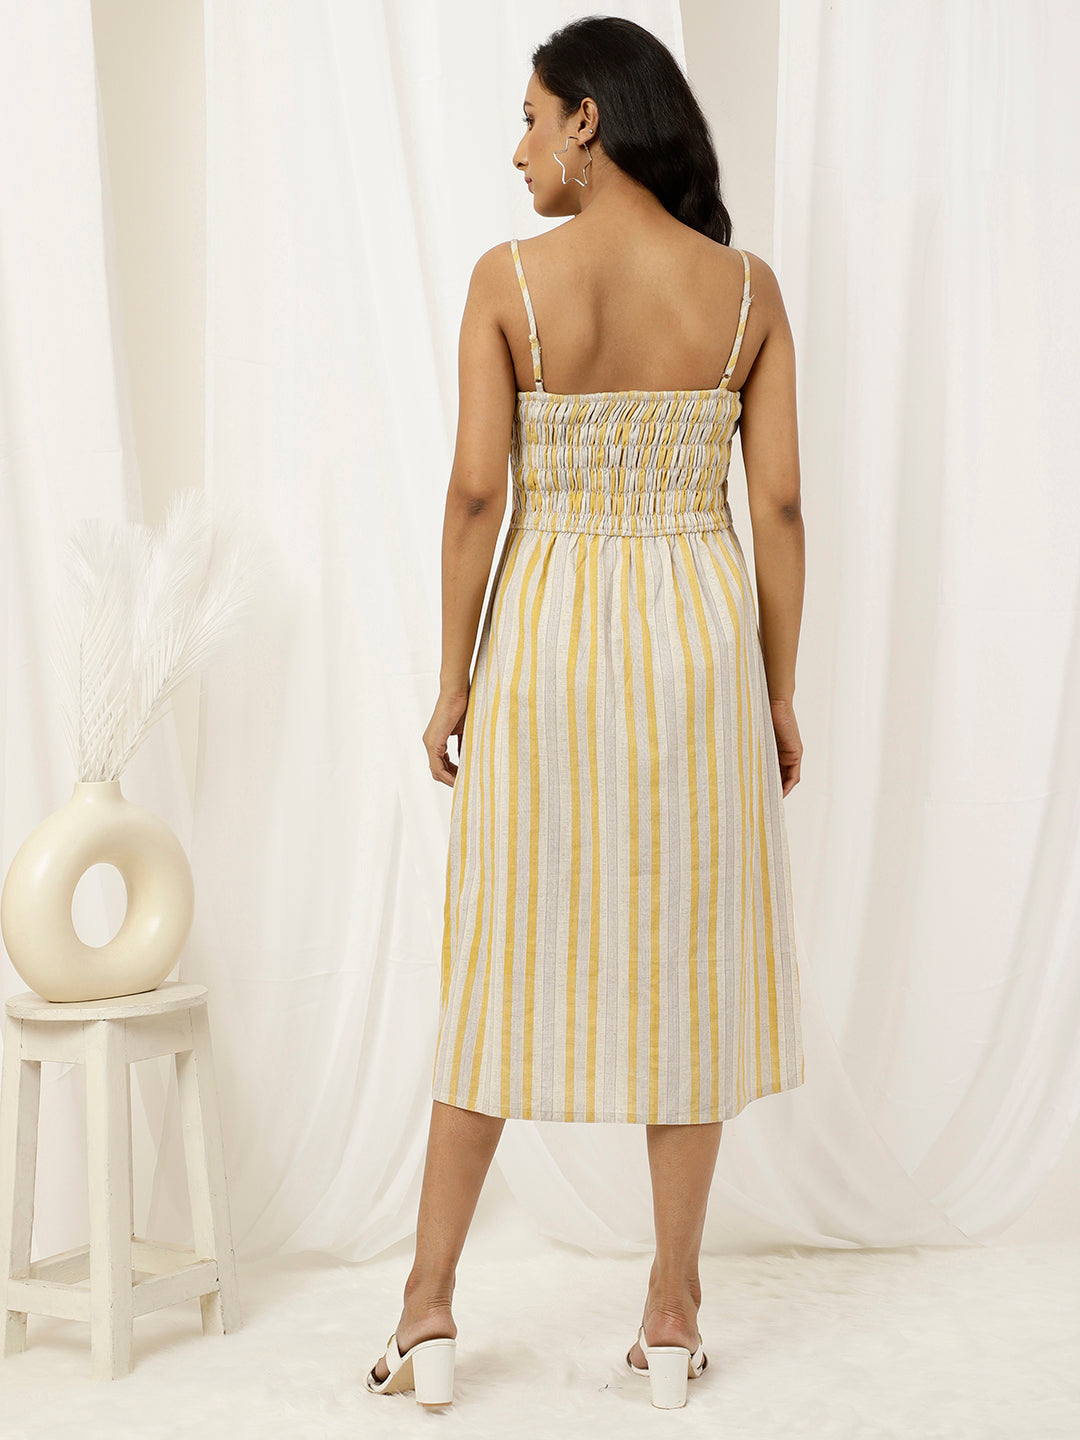 Beige And Yellow Striped Strappy Cotton Dress With Slits